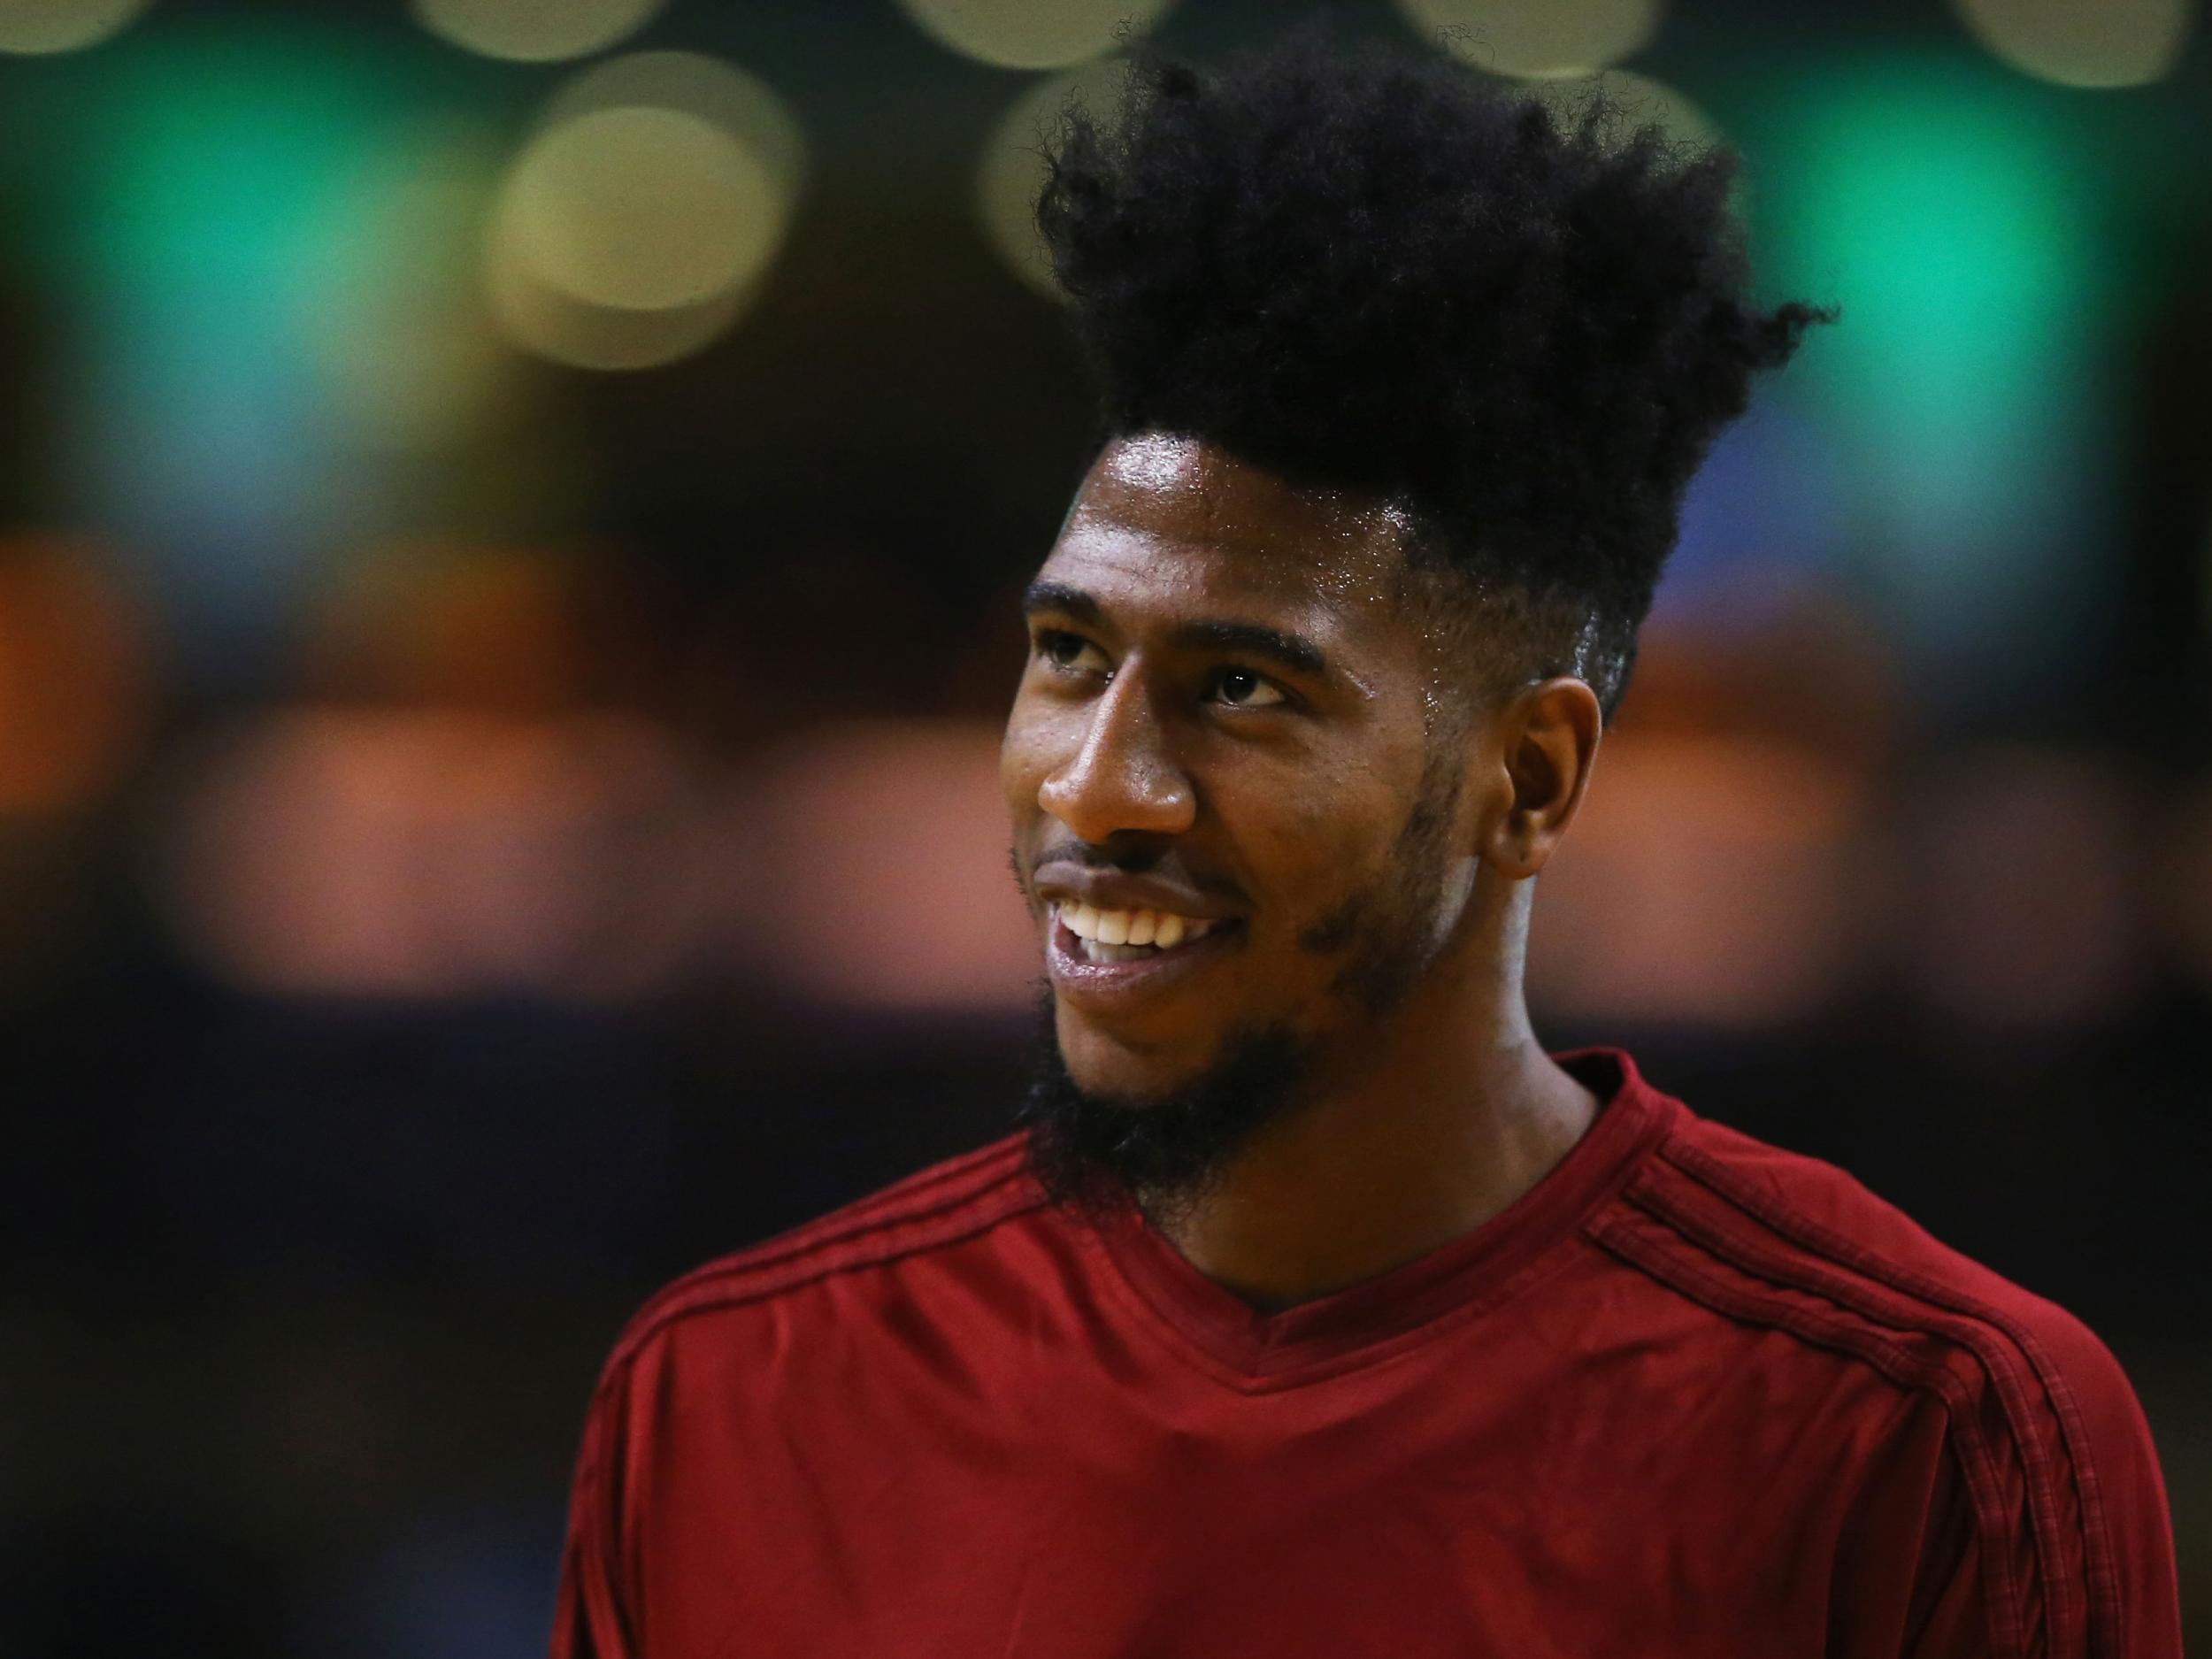 Iman Shumpert of the Cleveland Cavaliers looks on during warmups before the game against the Boston Celtics